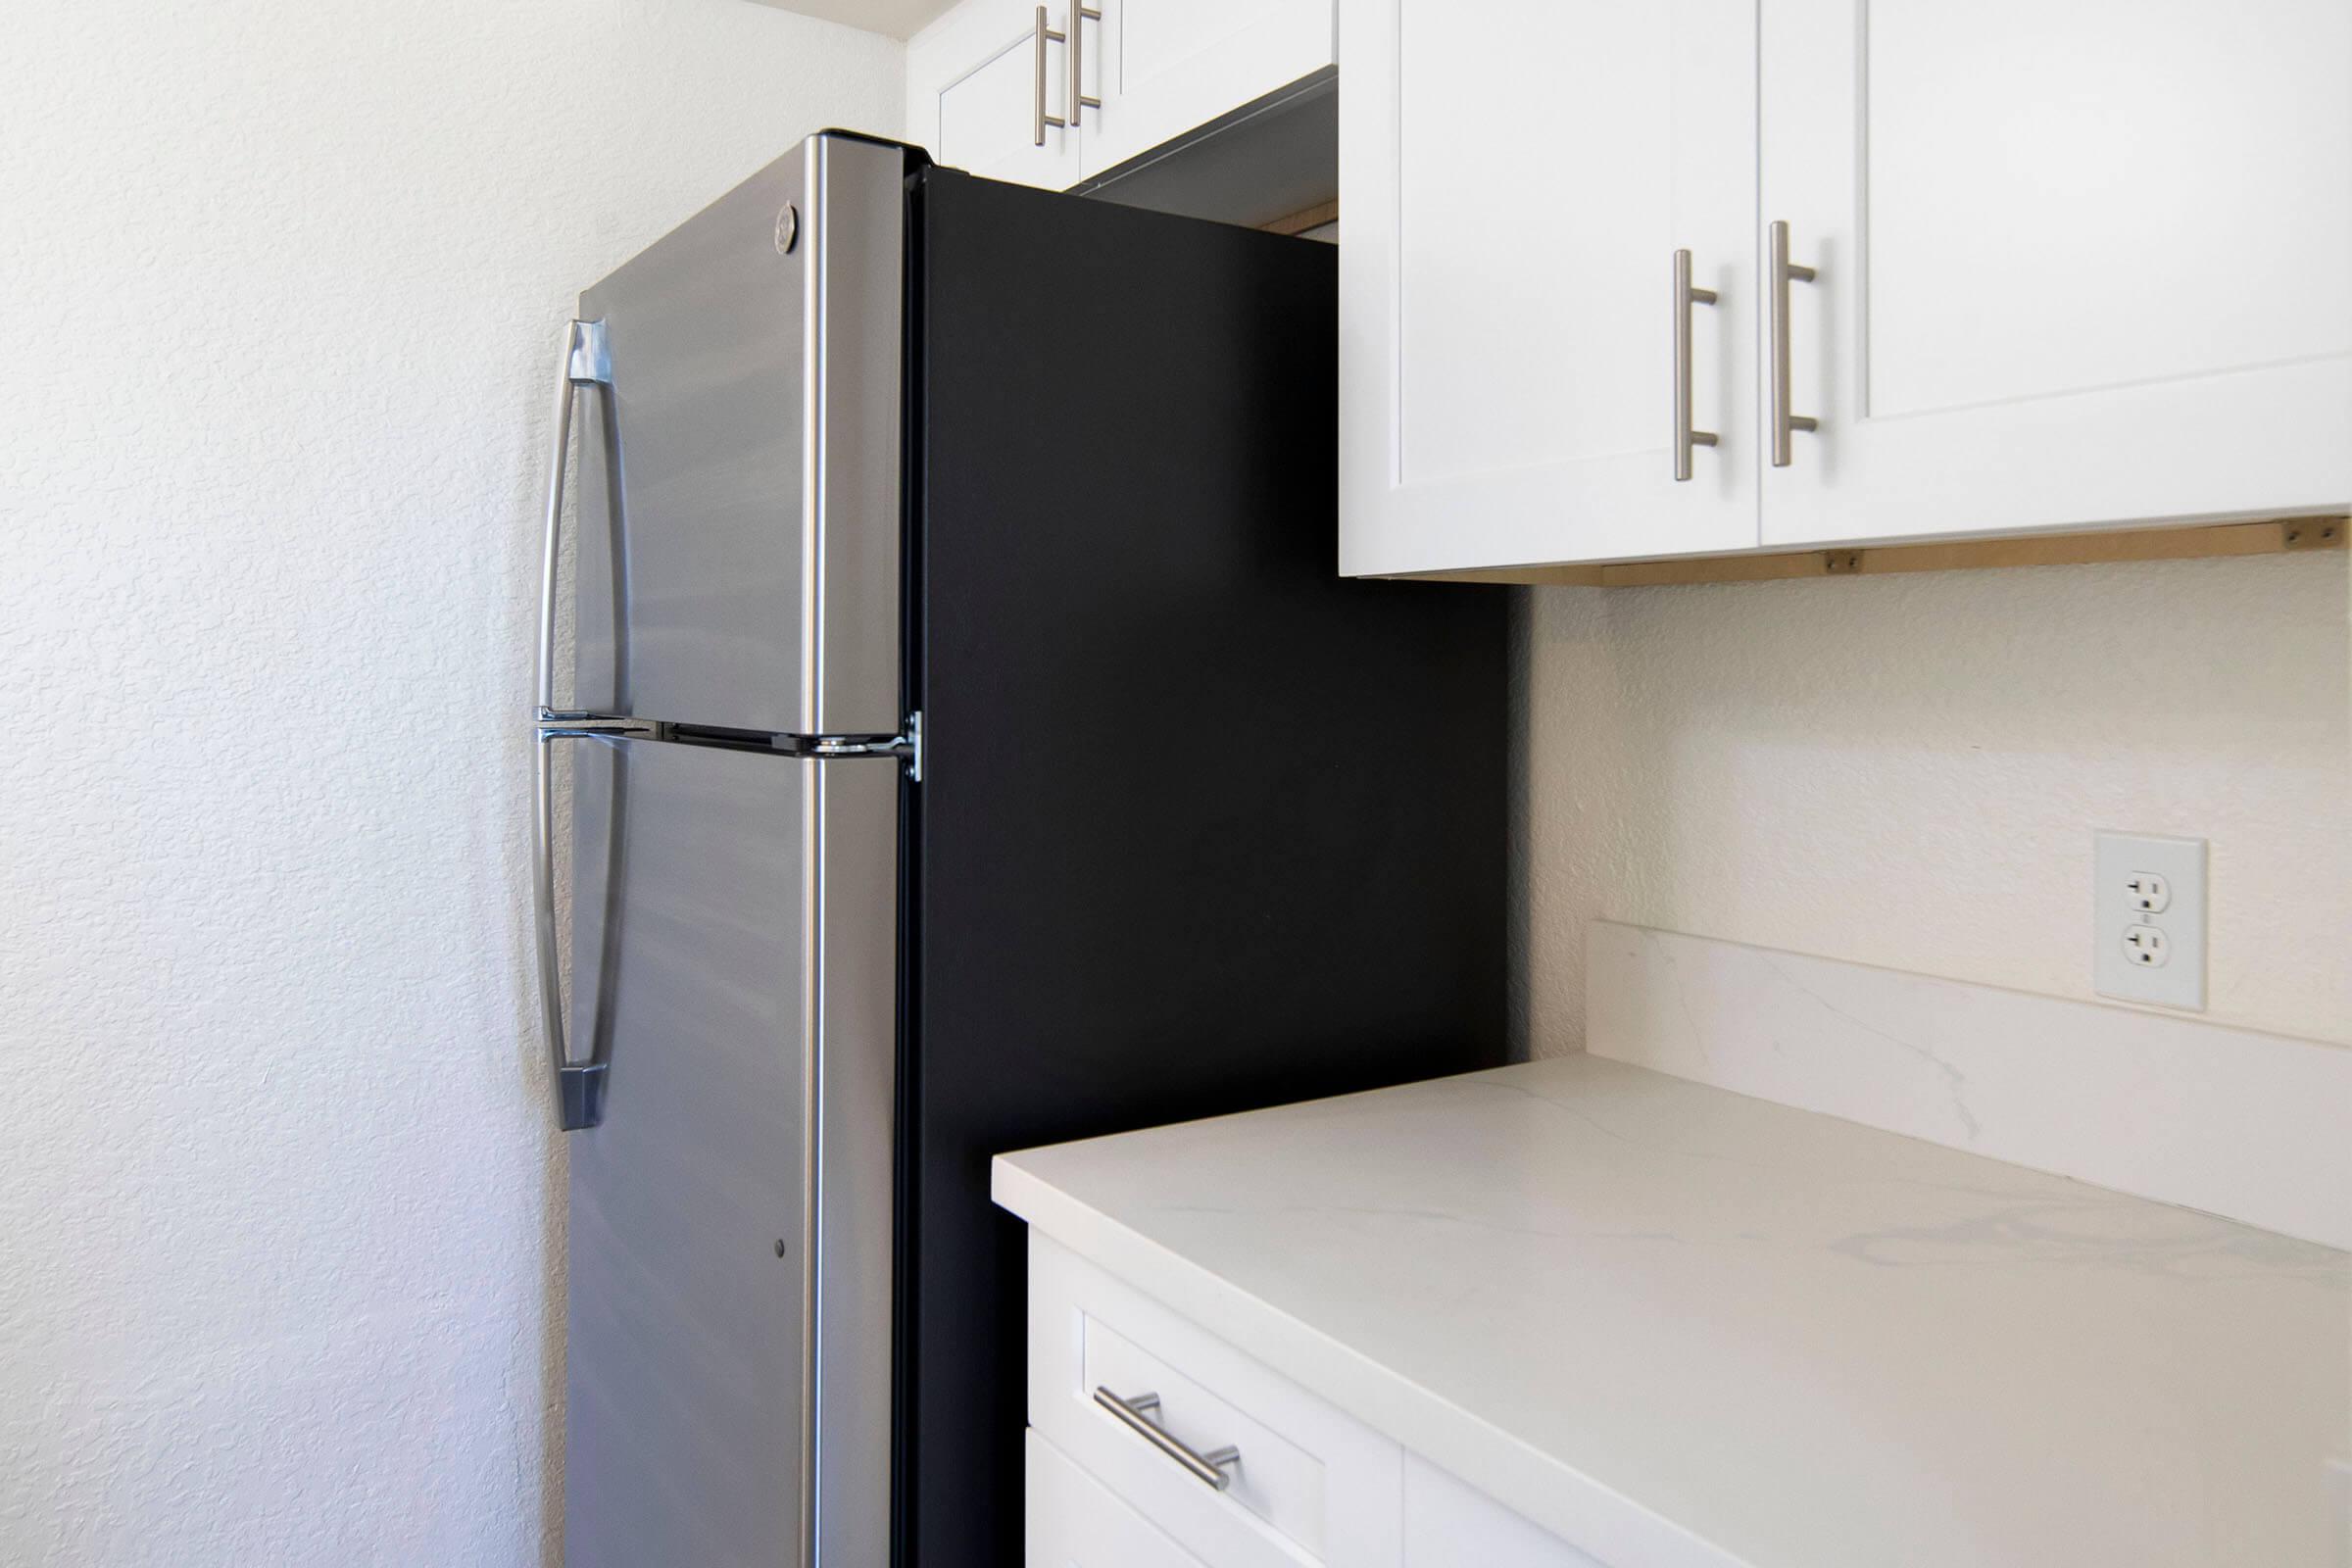 a stainless steel refrigerator in a kitchen